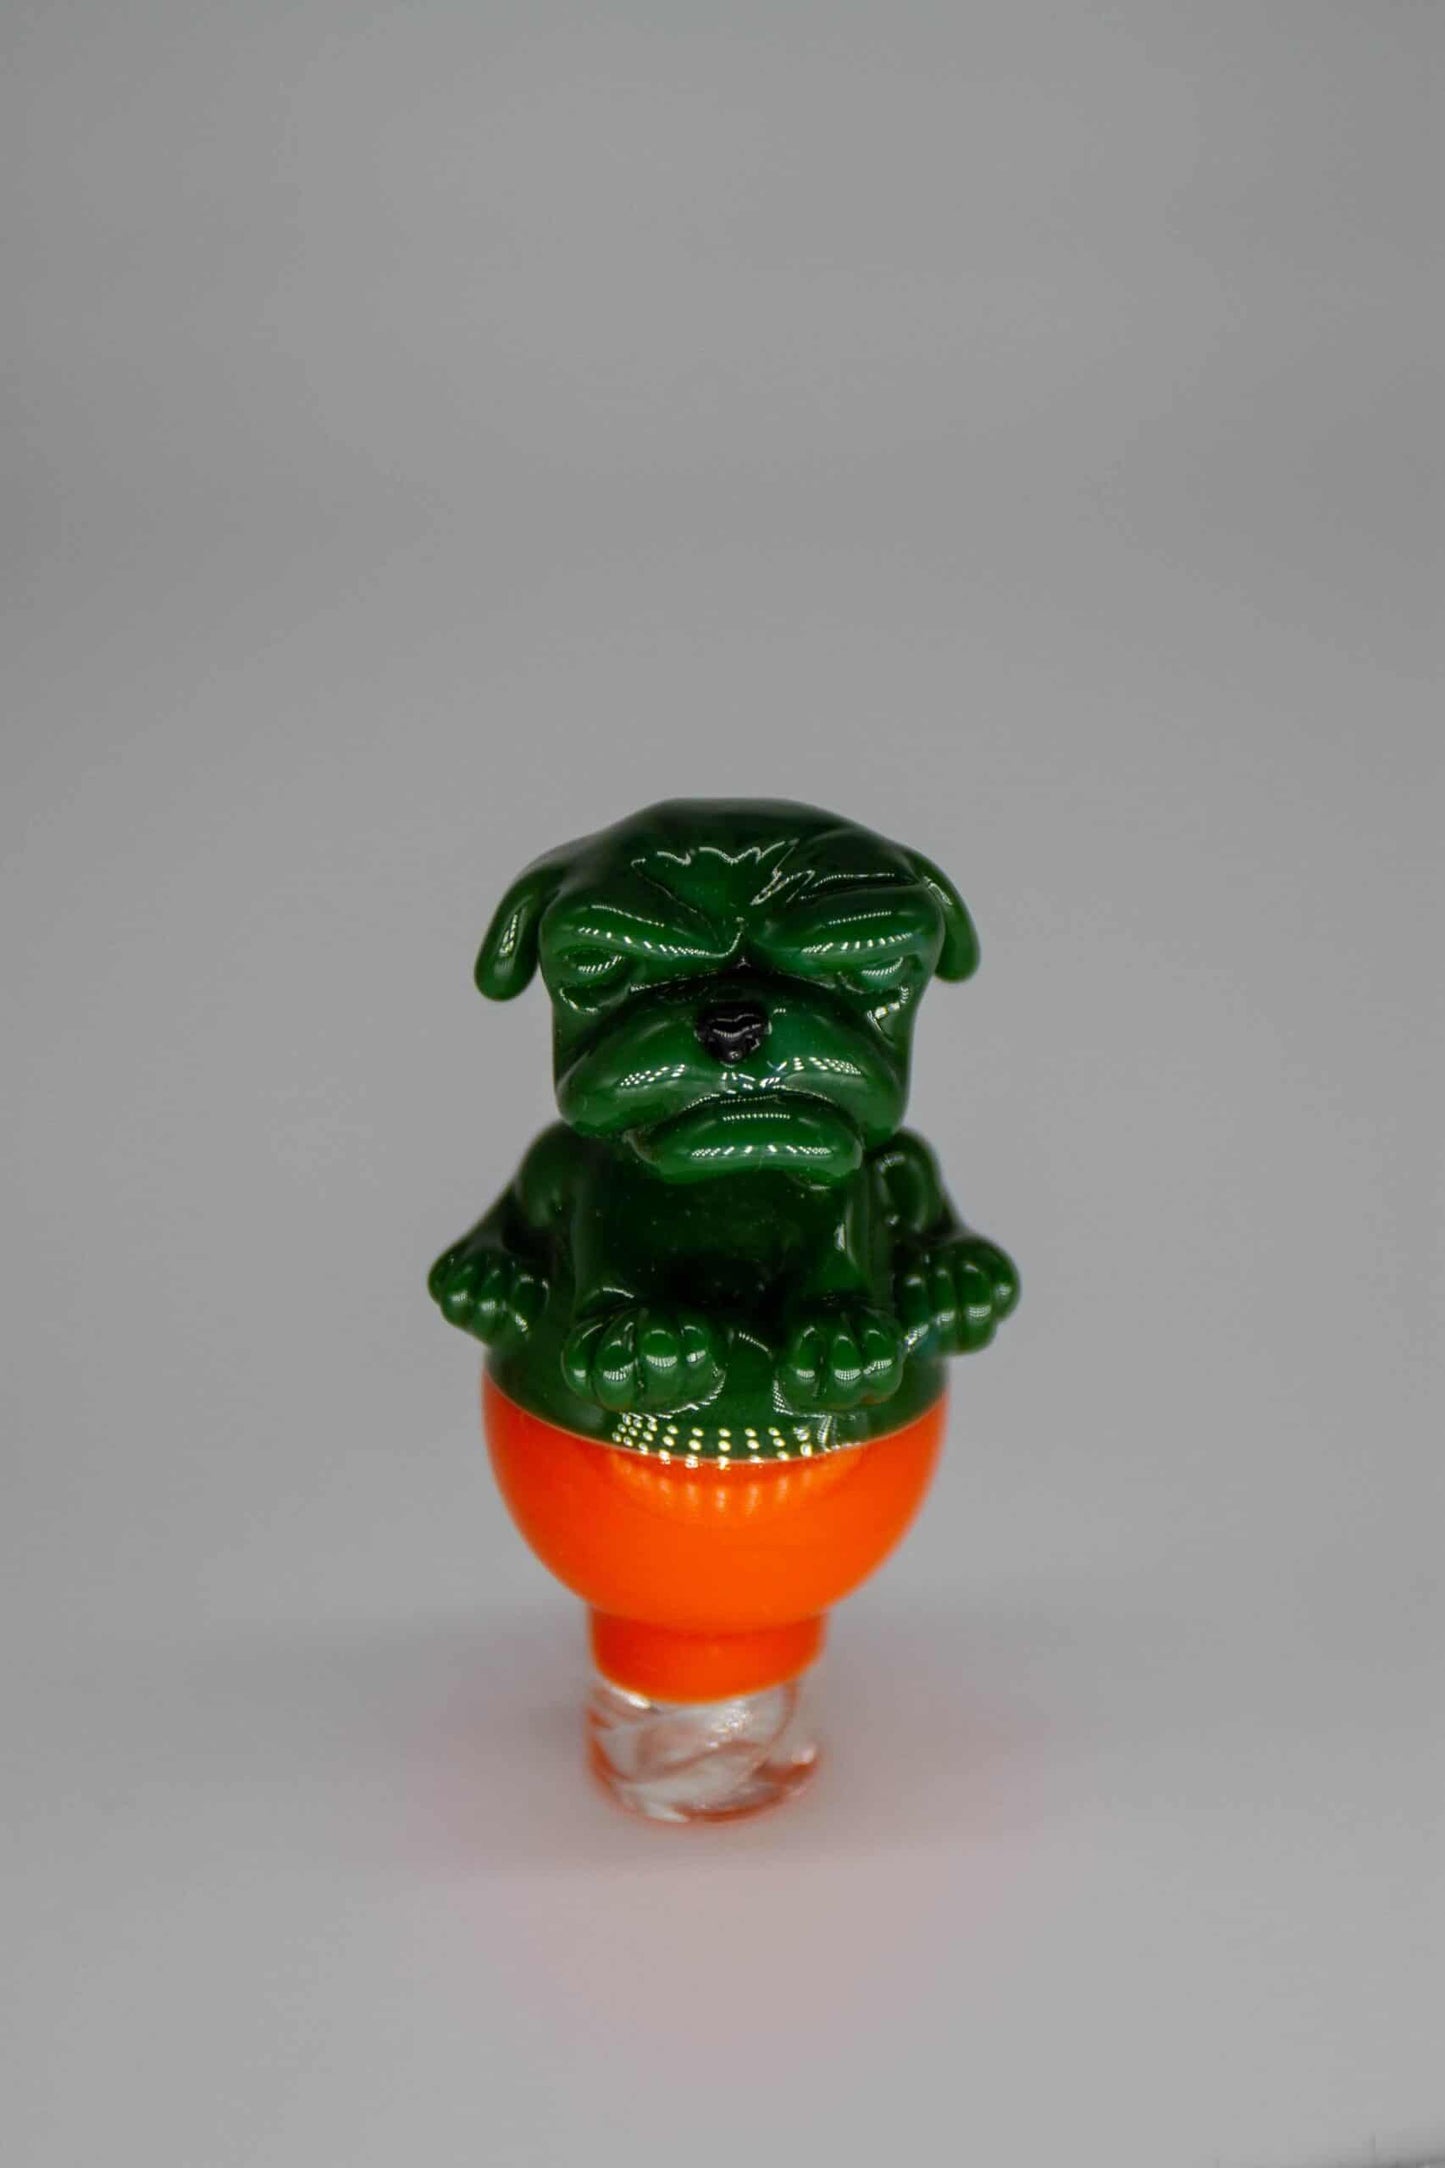 exclusive design of the Miami Orange/Green Bullie Spinner Carb Cap by Swanny